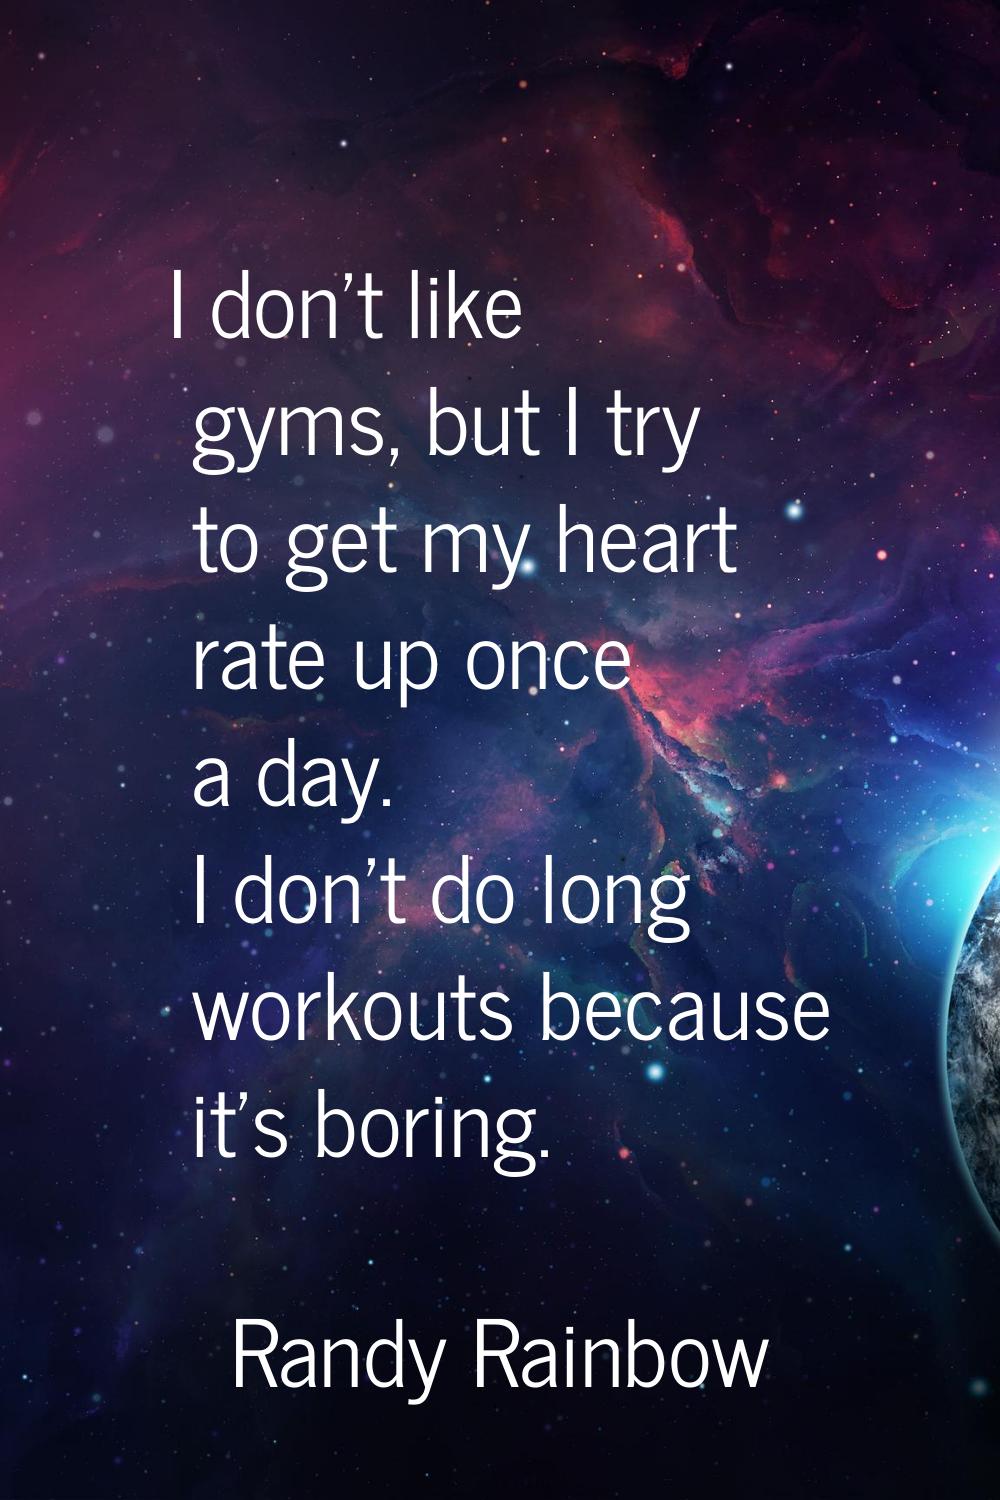 I don't like gyms, but I try to get my heart rate up once a day. I don't do long workouts because i